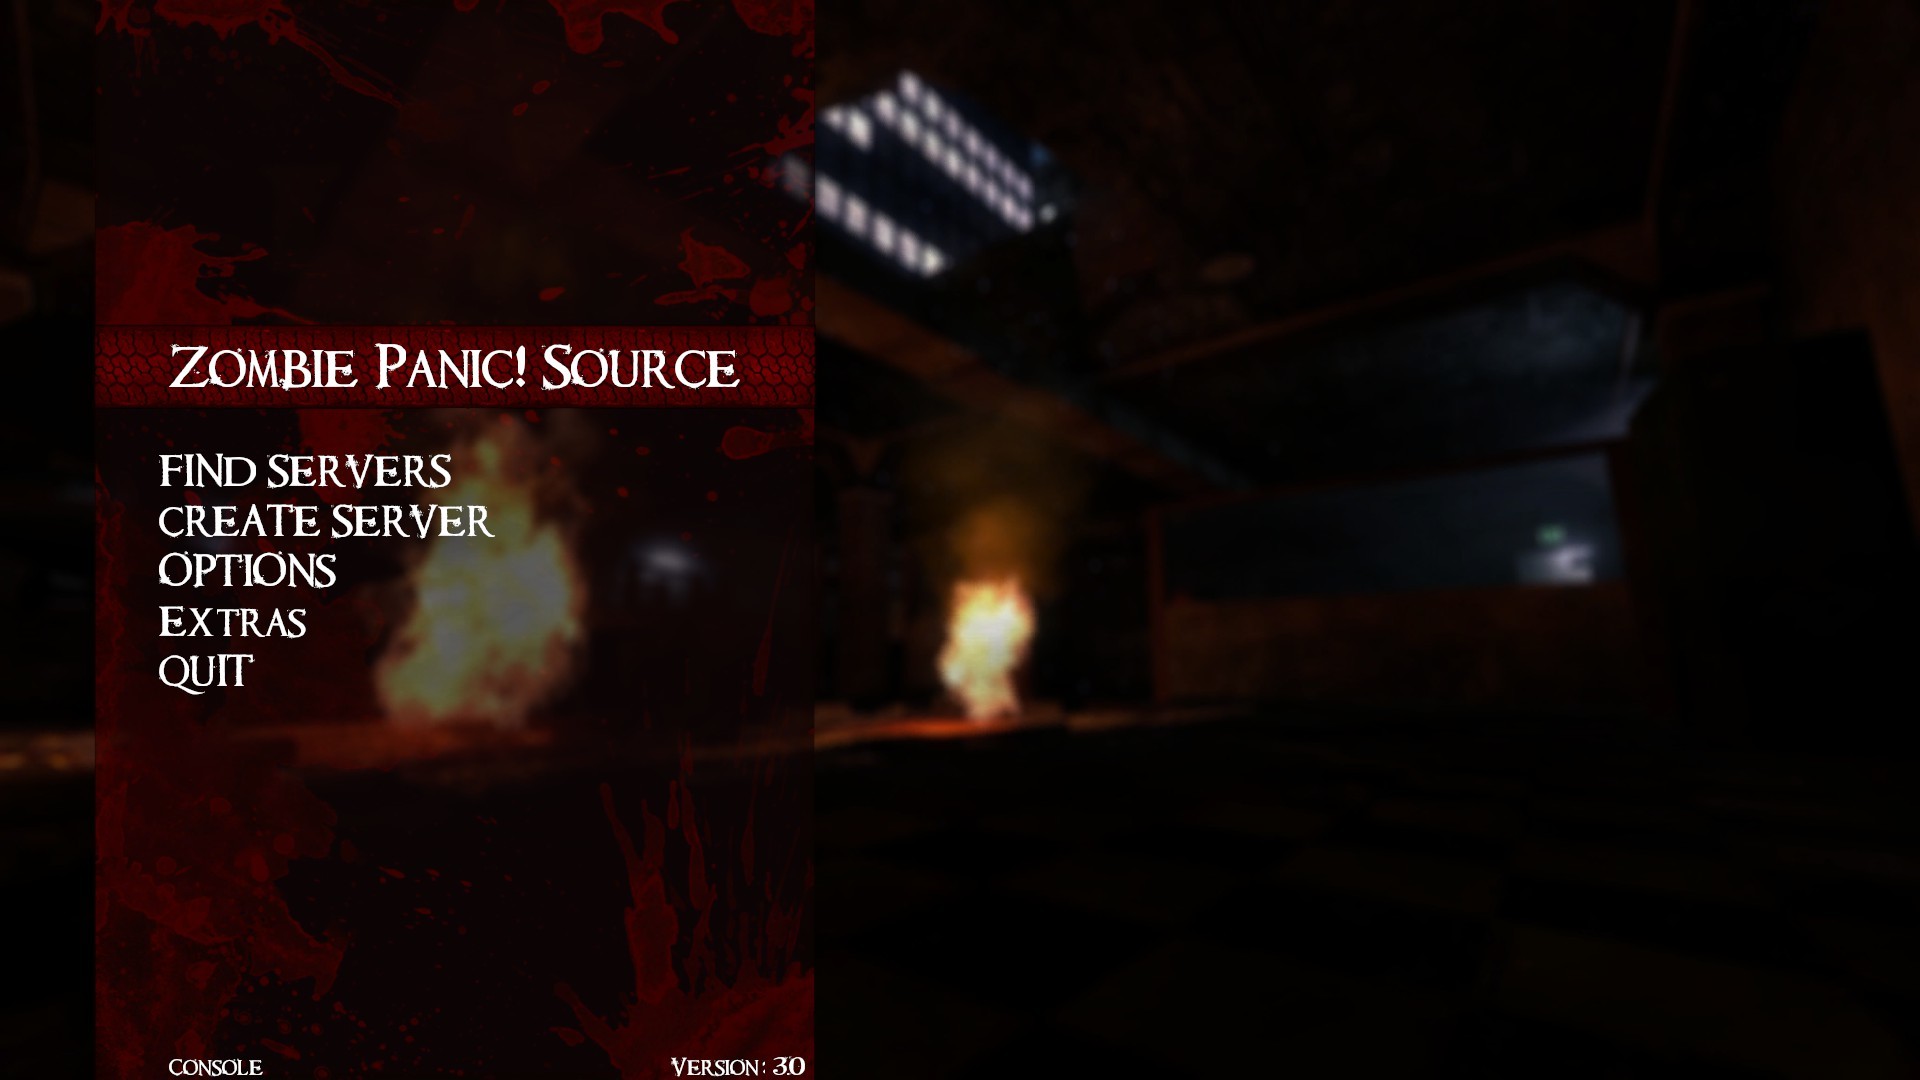 Zombie panic source system requirements